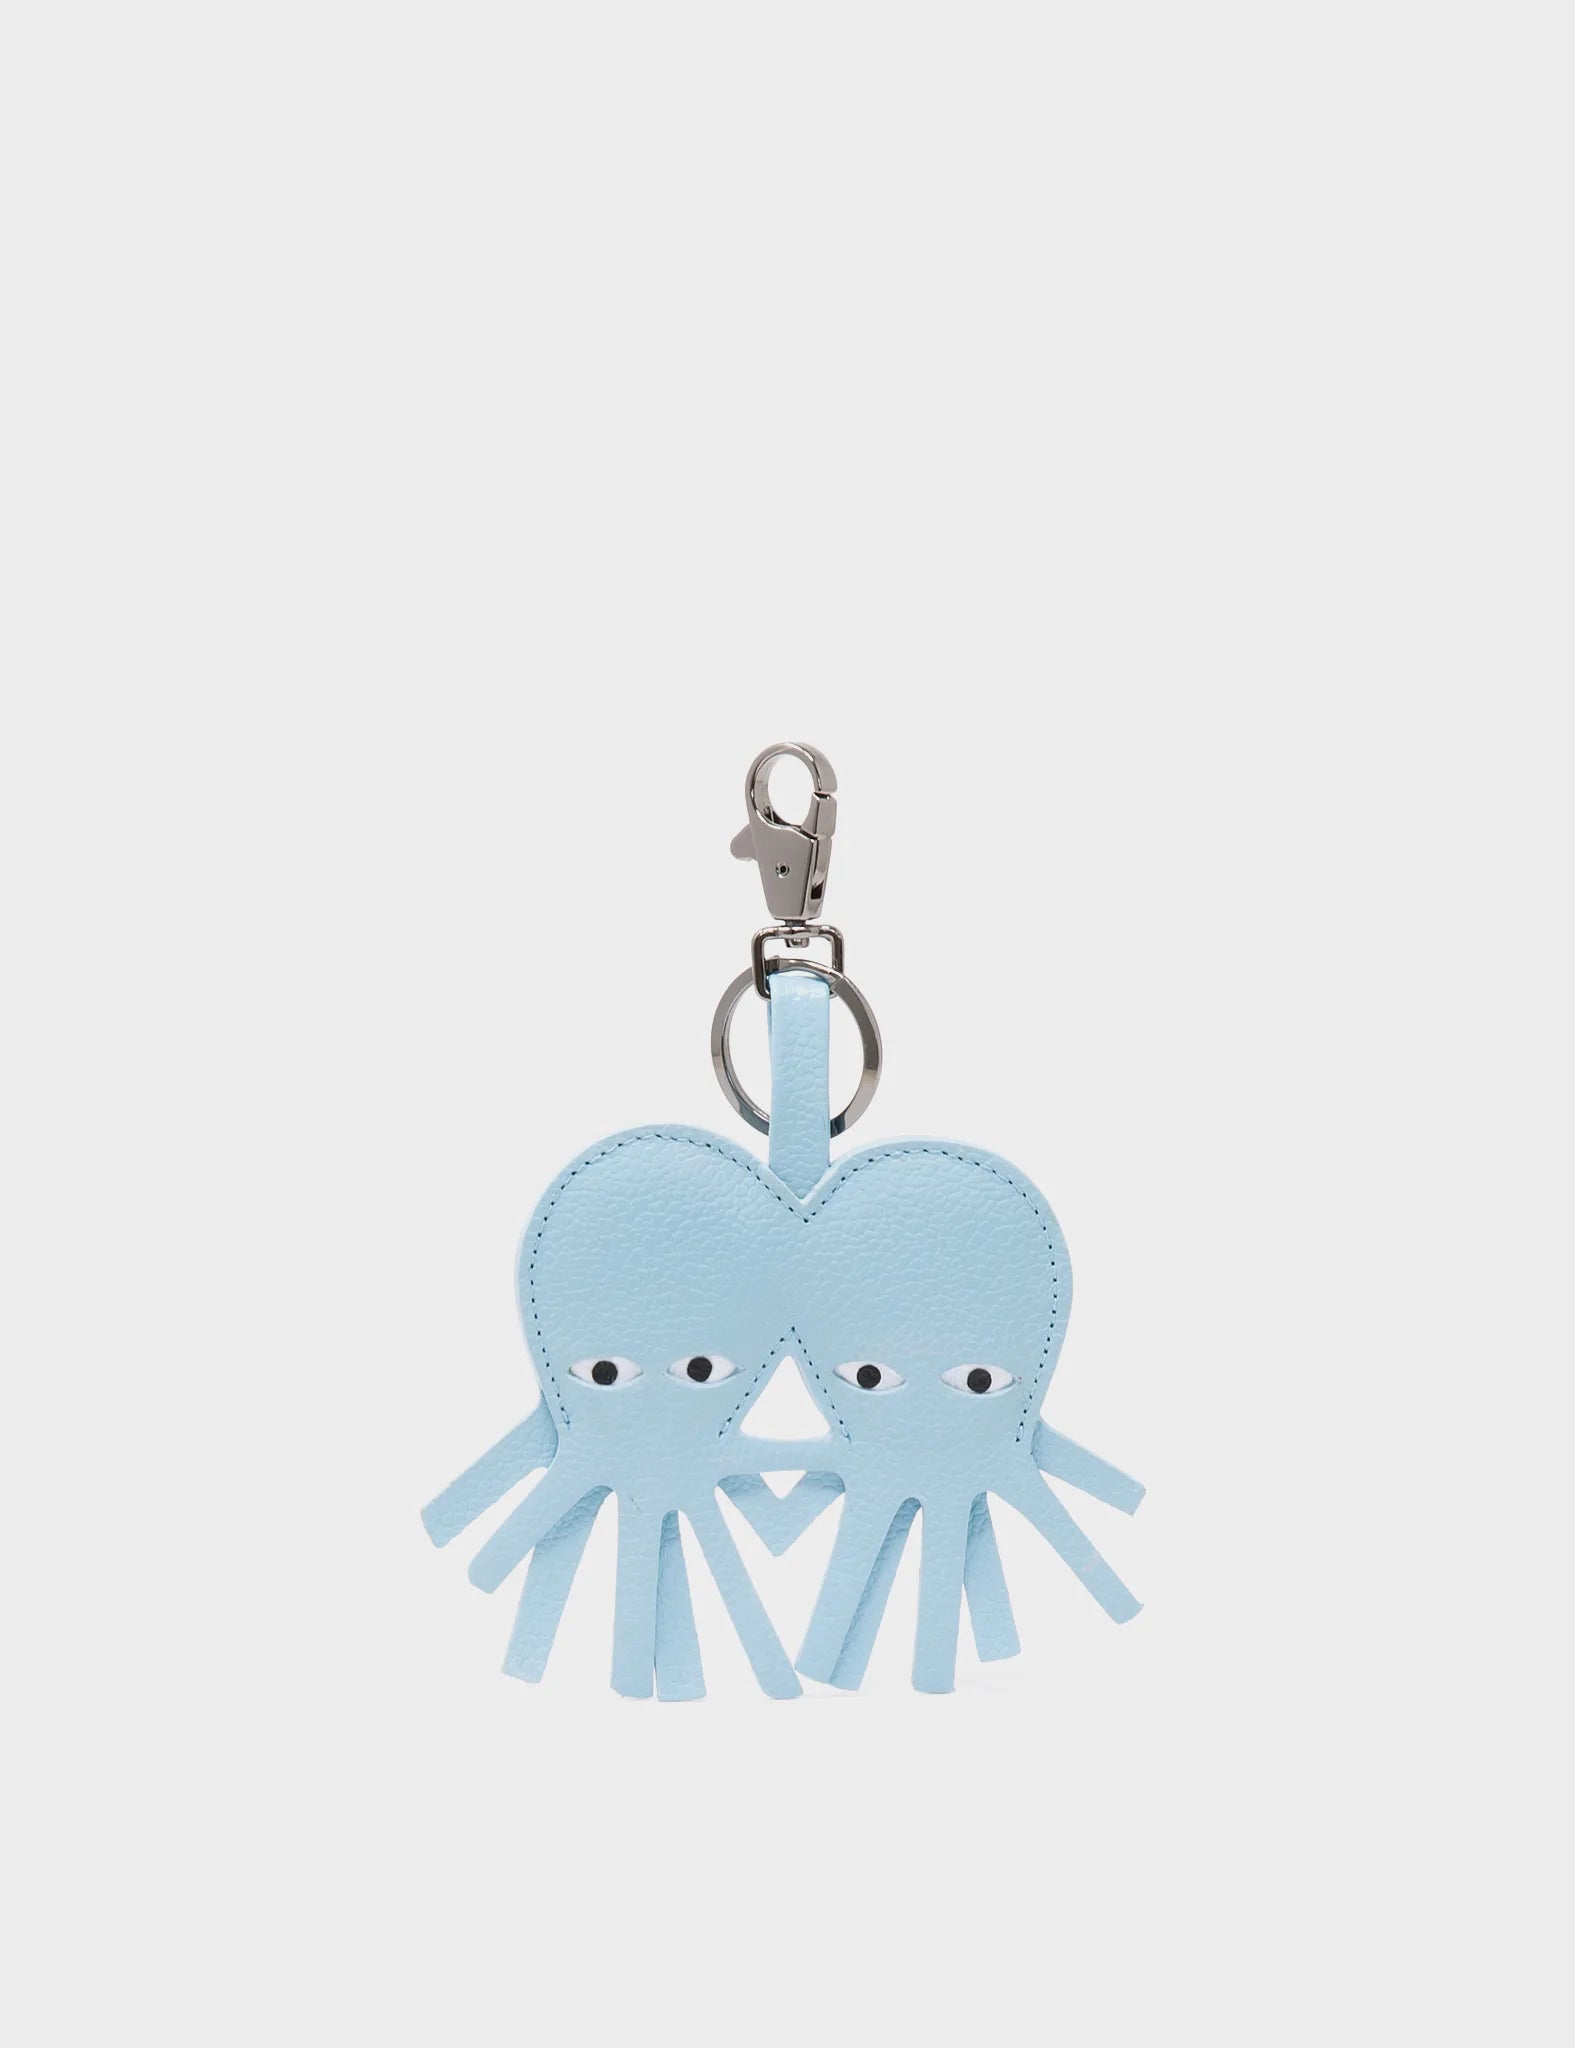 Octopus twins Charm - Stratosphere Blue Leather Keychain